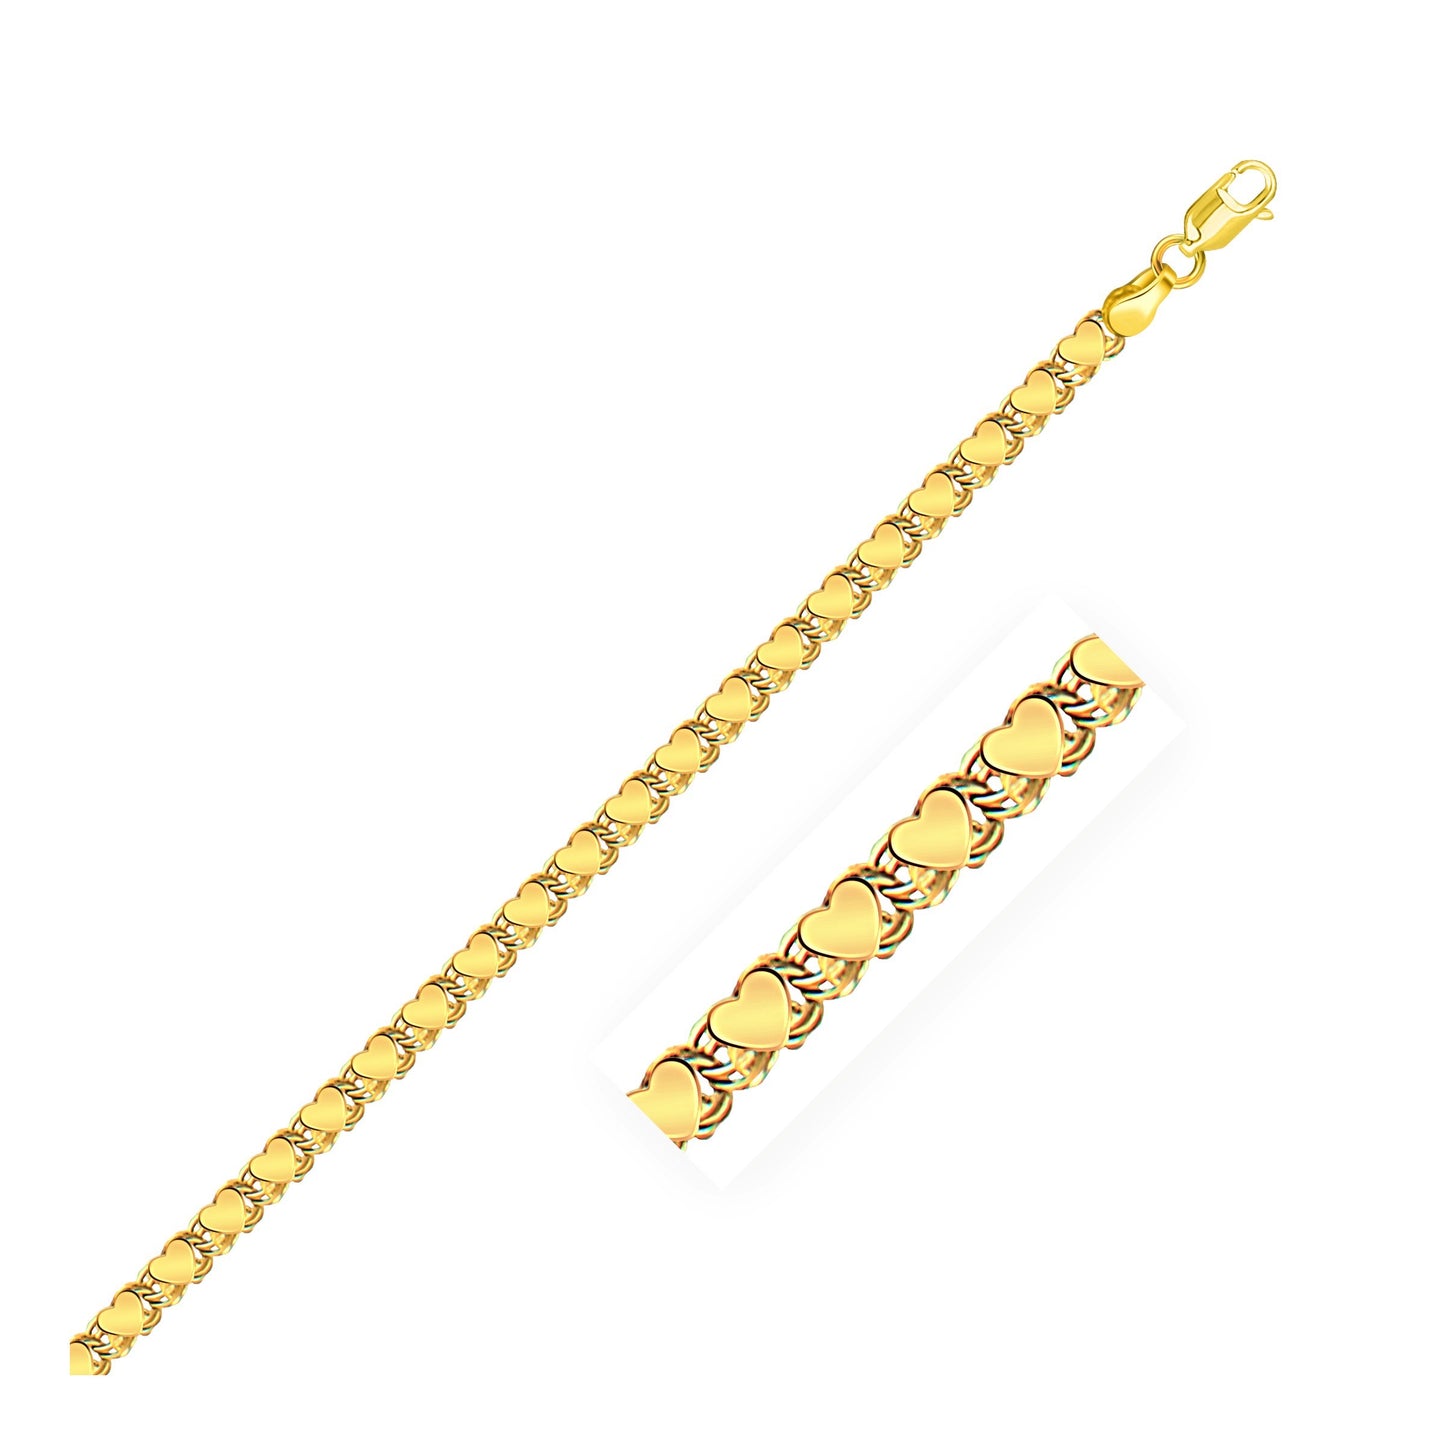 3.3mm 14k Yellow Gold Heart Anklet